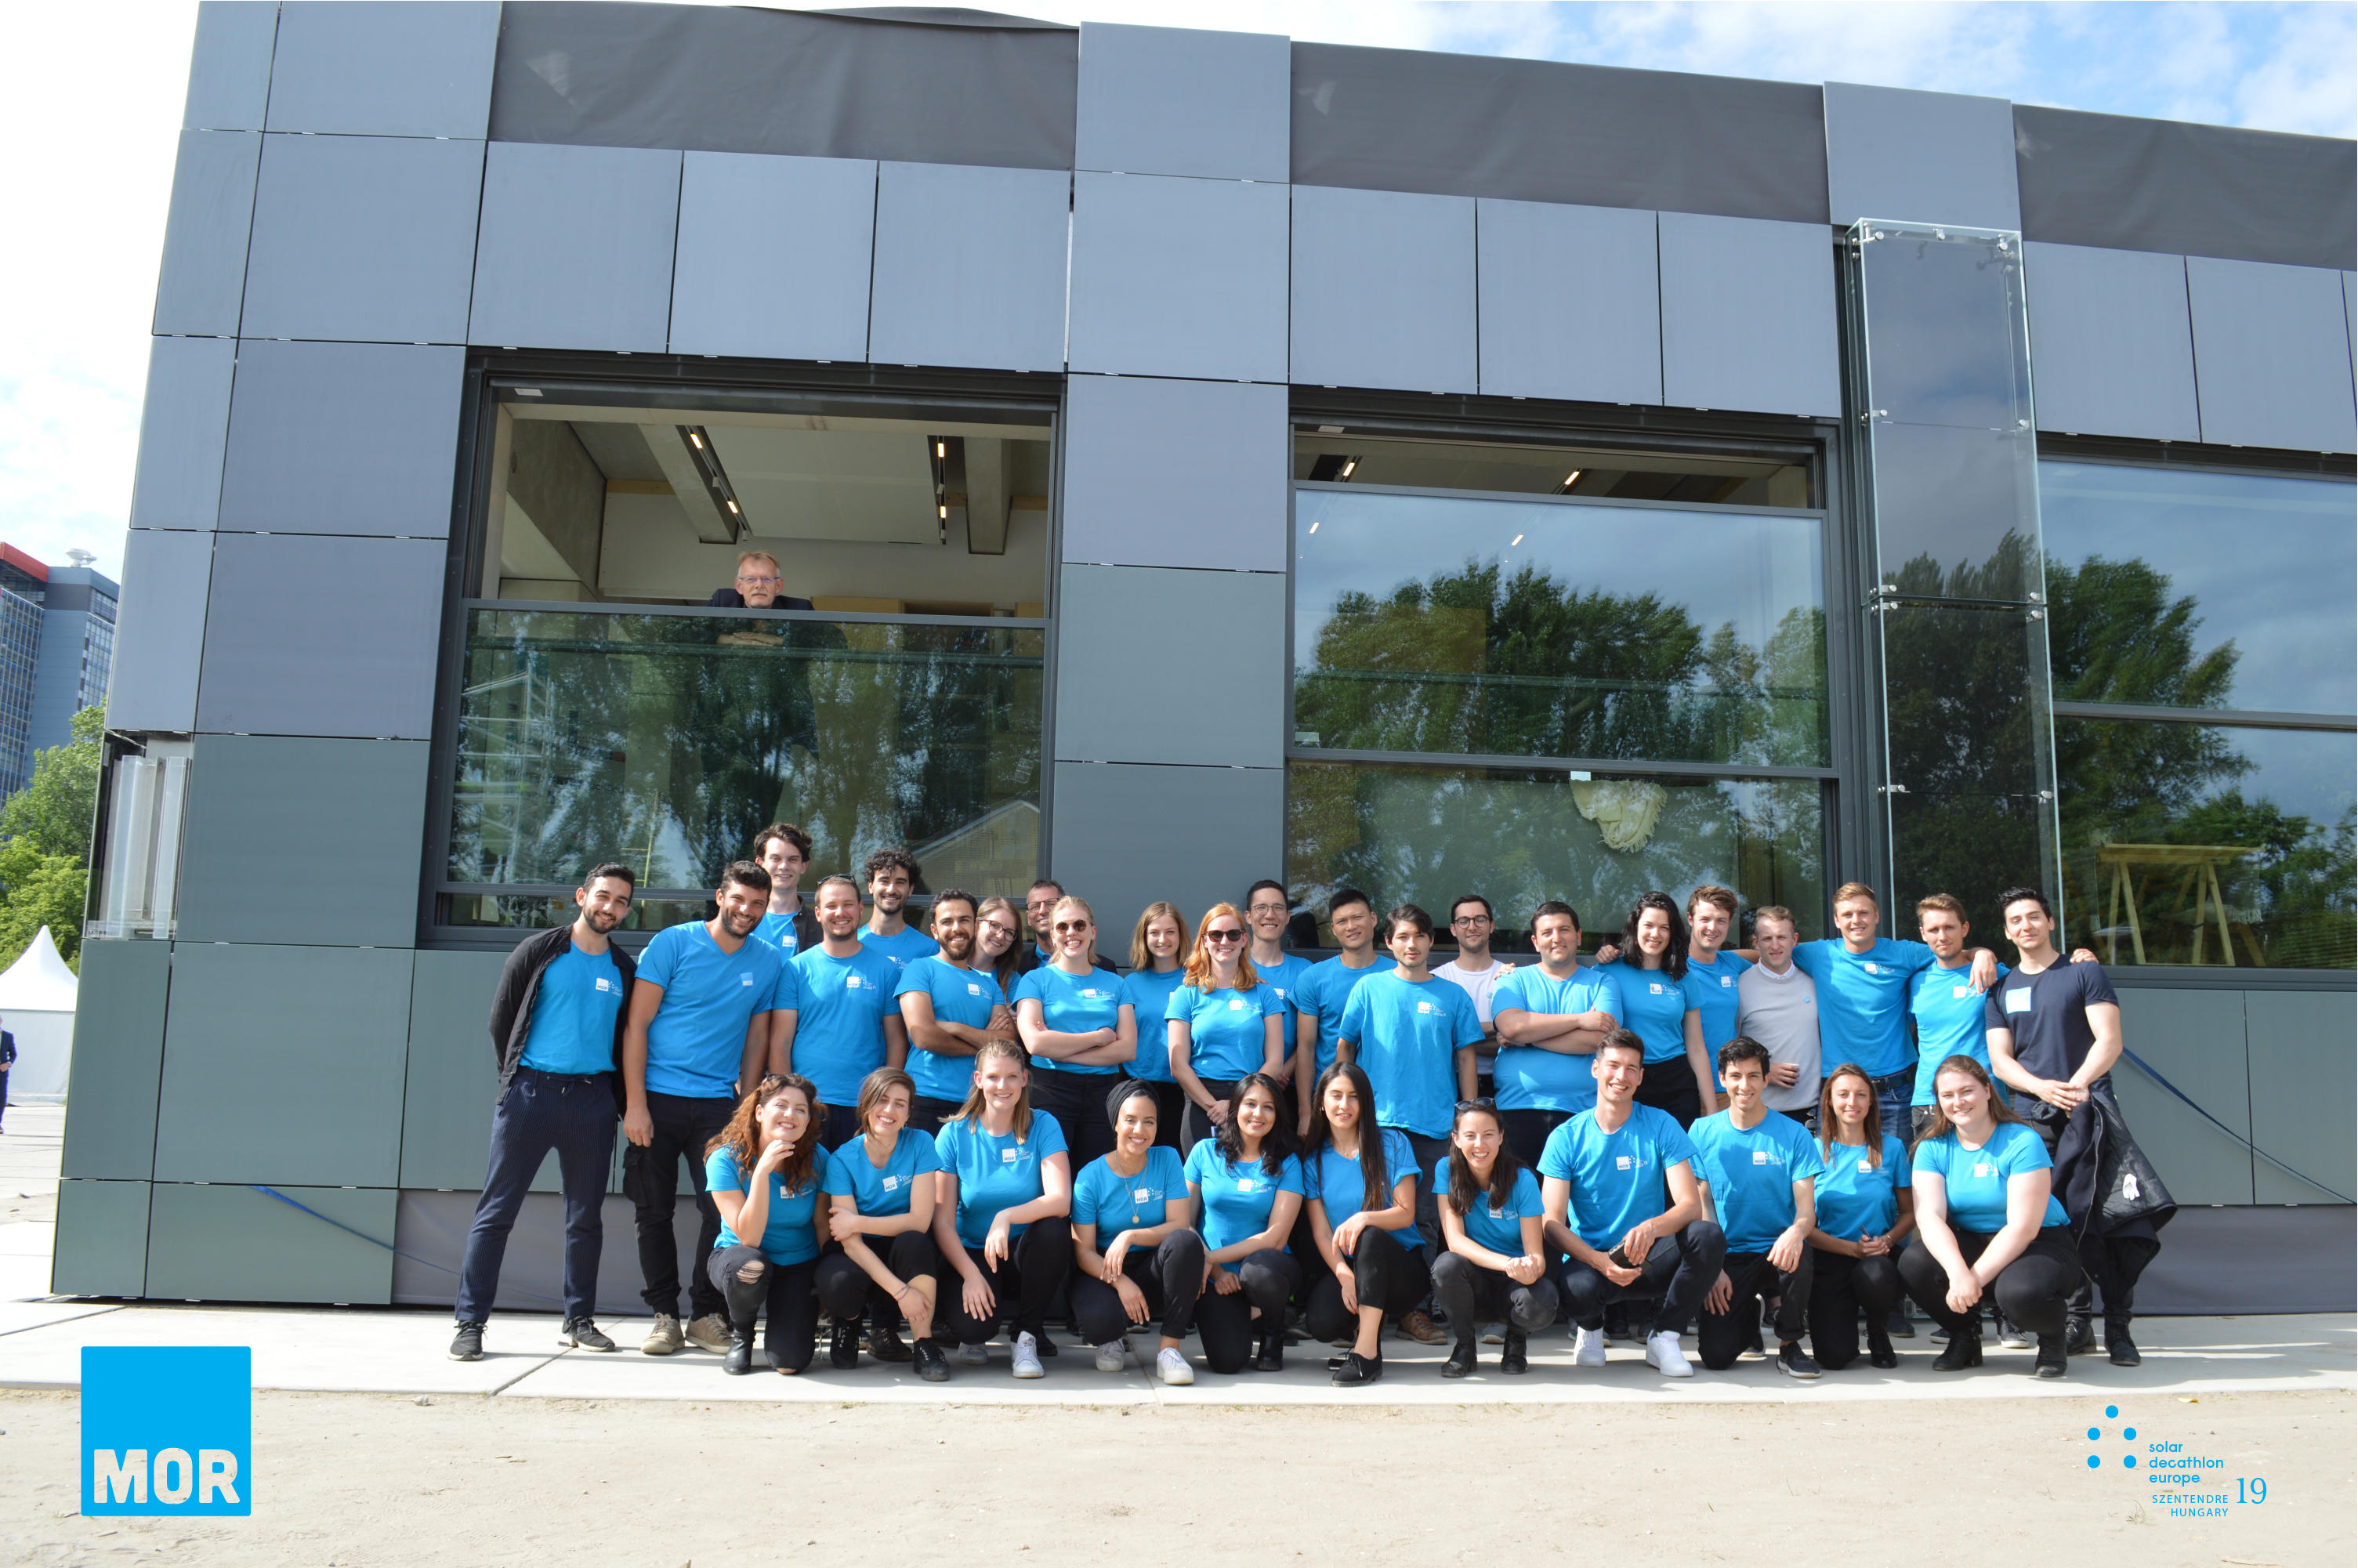 MOR-team team consisting of 52 students with 20 different nationalities from 8 disciplines